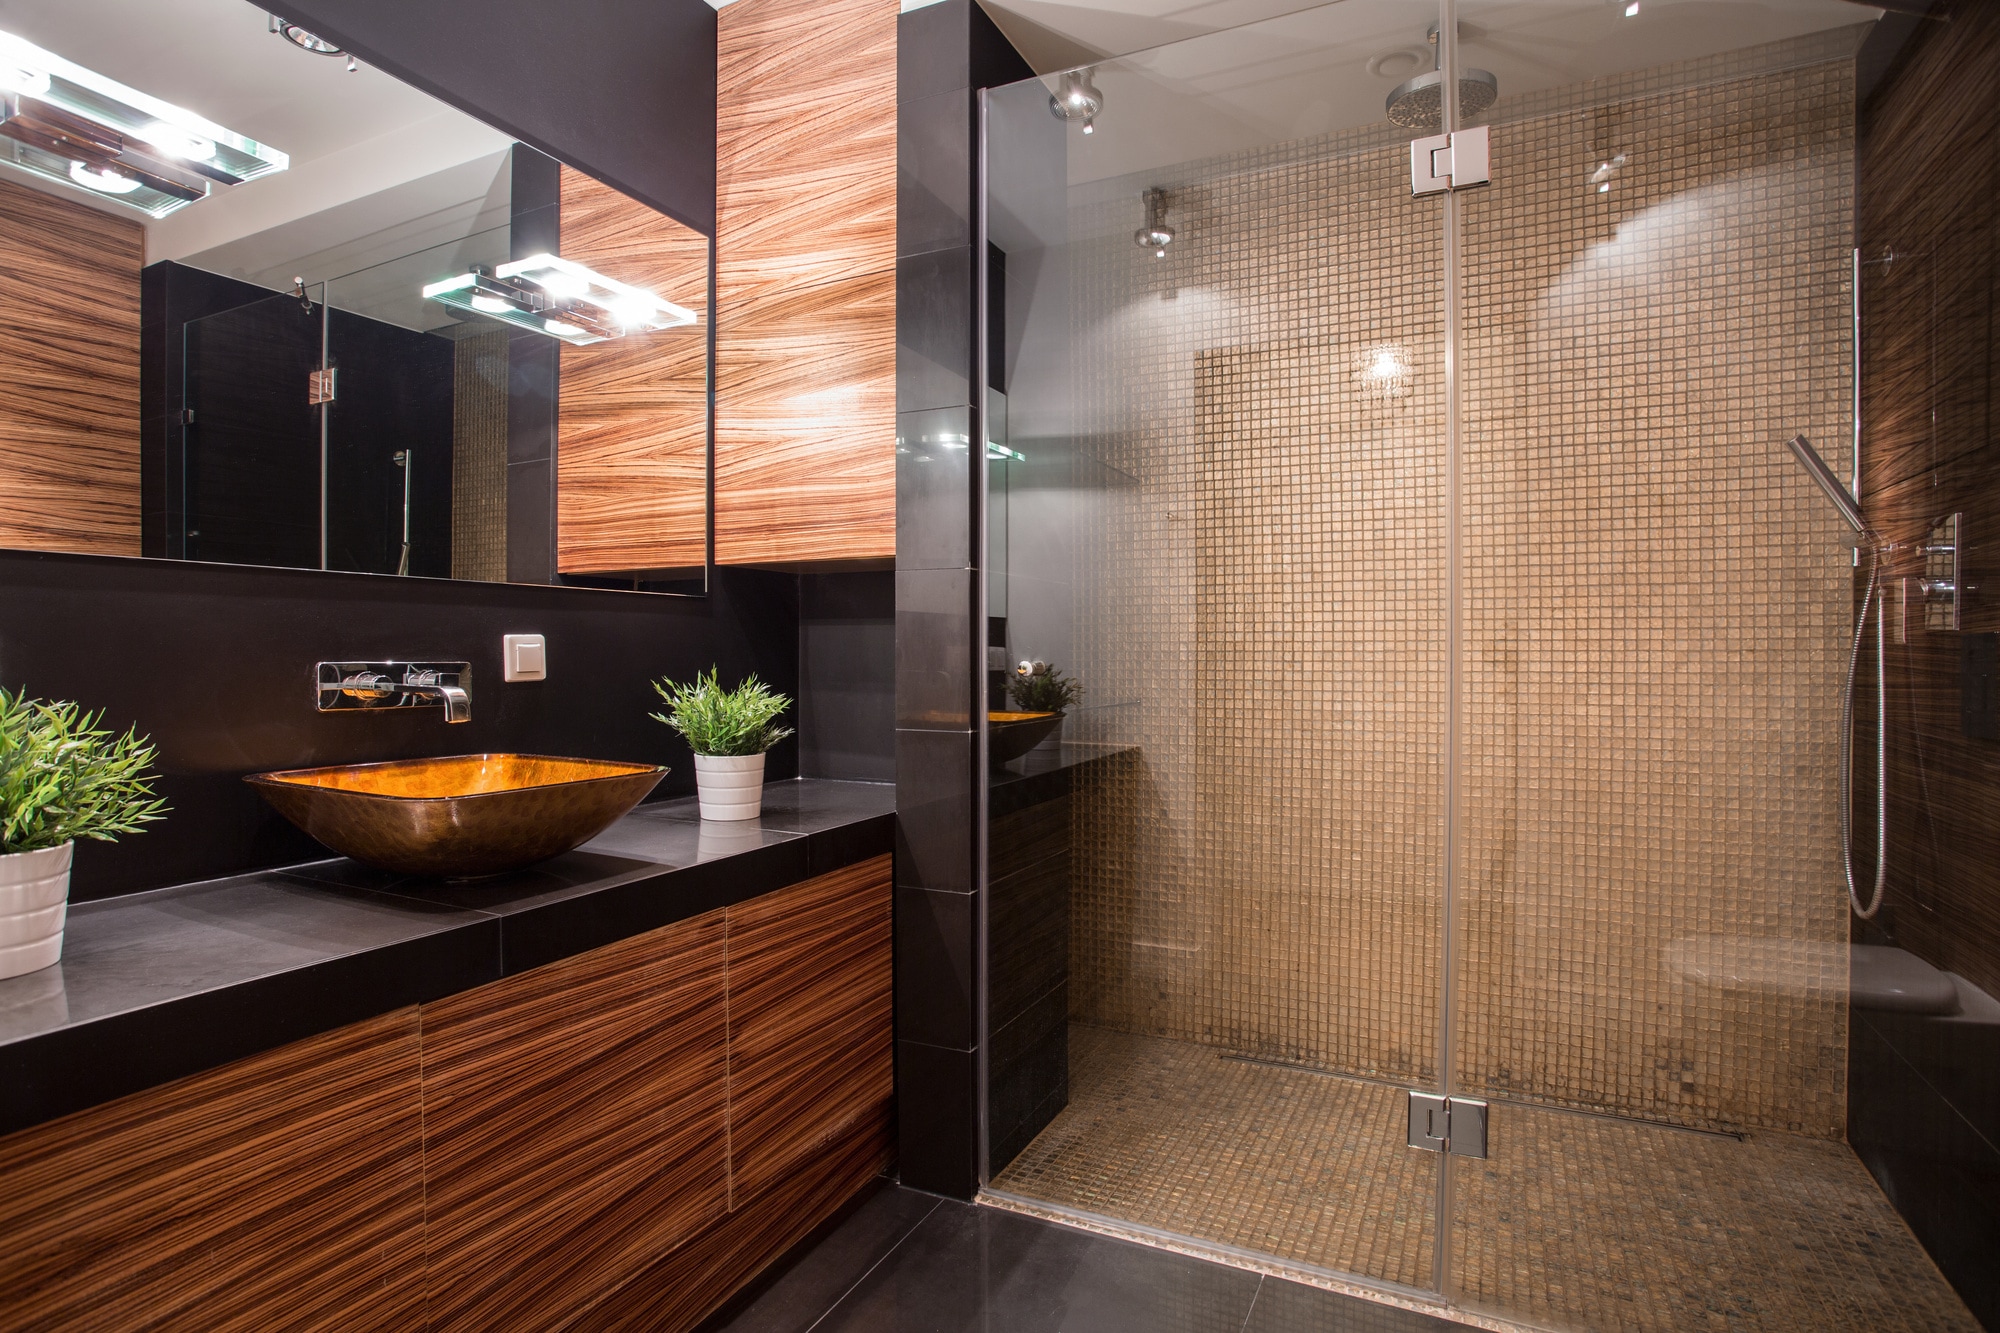 8 Modern Bathroom Ideas to Add Style and Value to Your Home